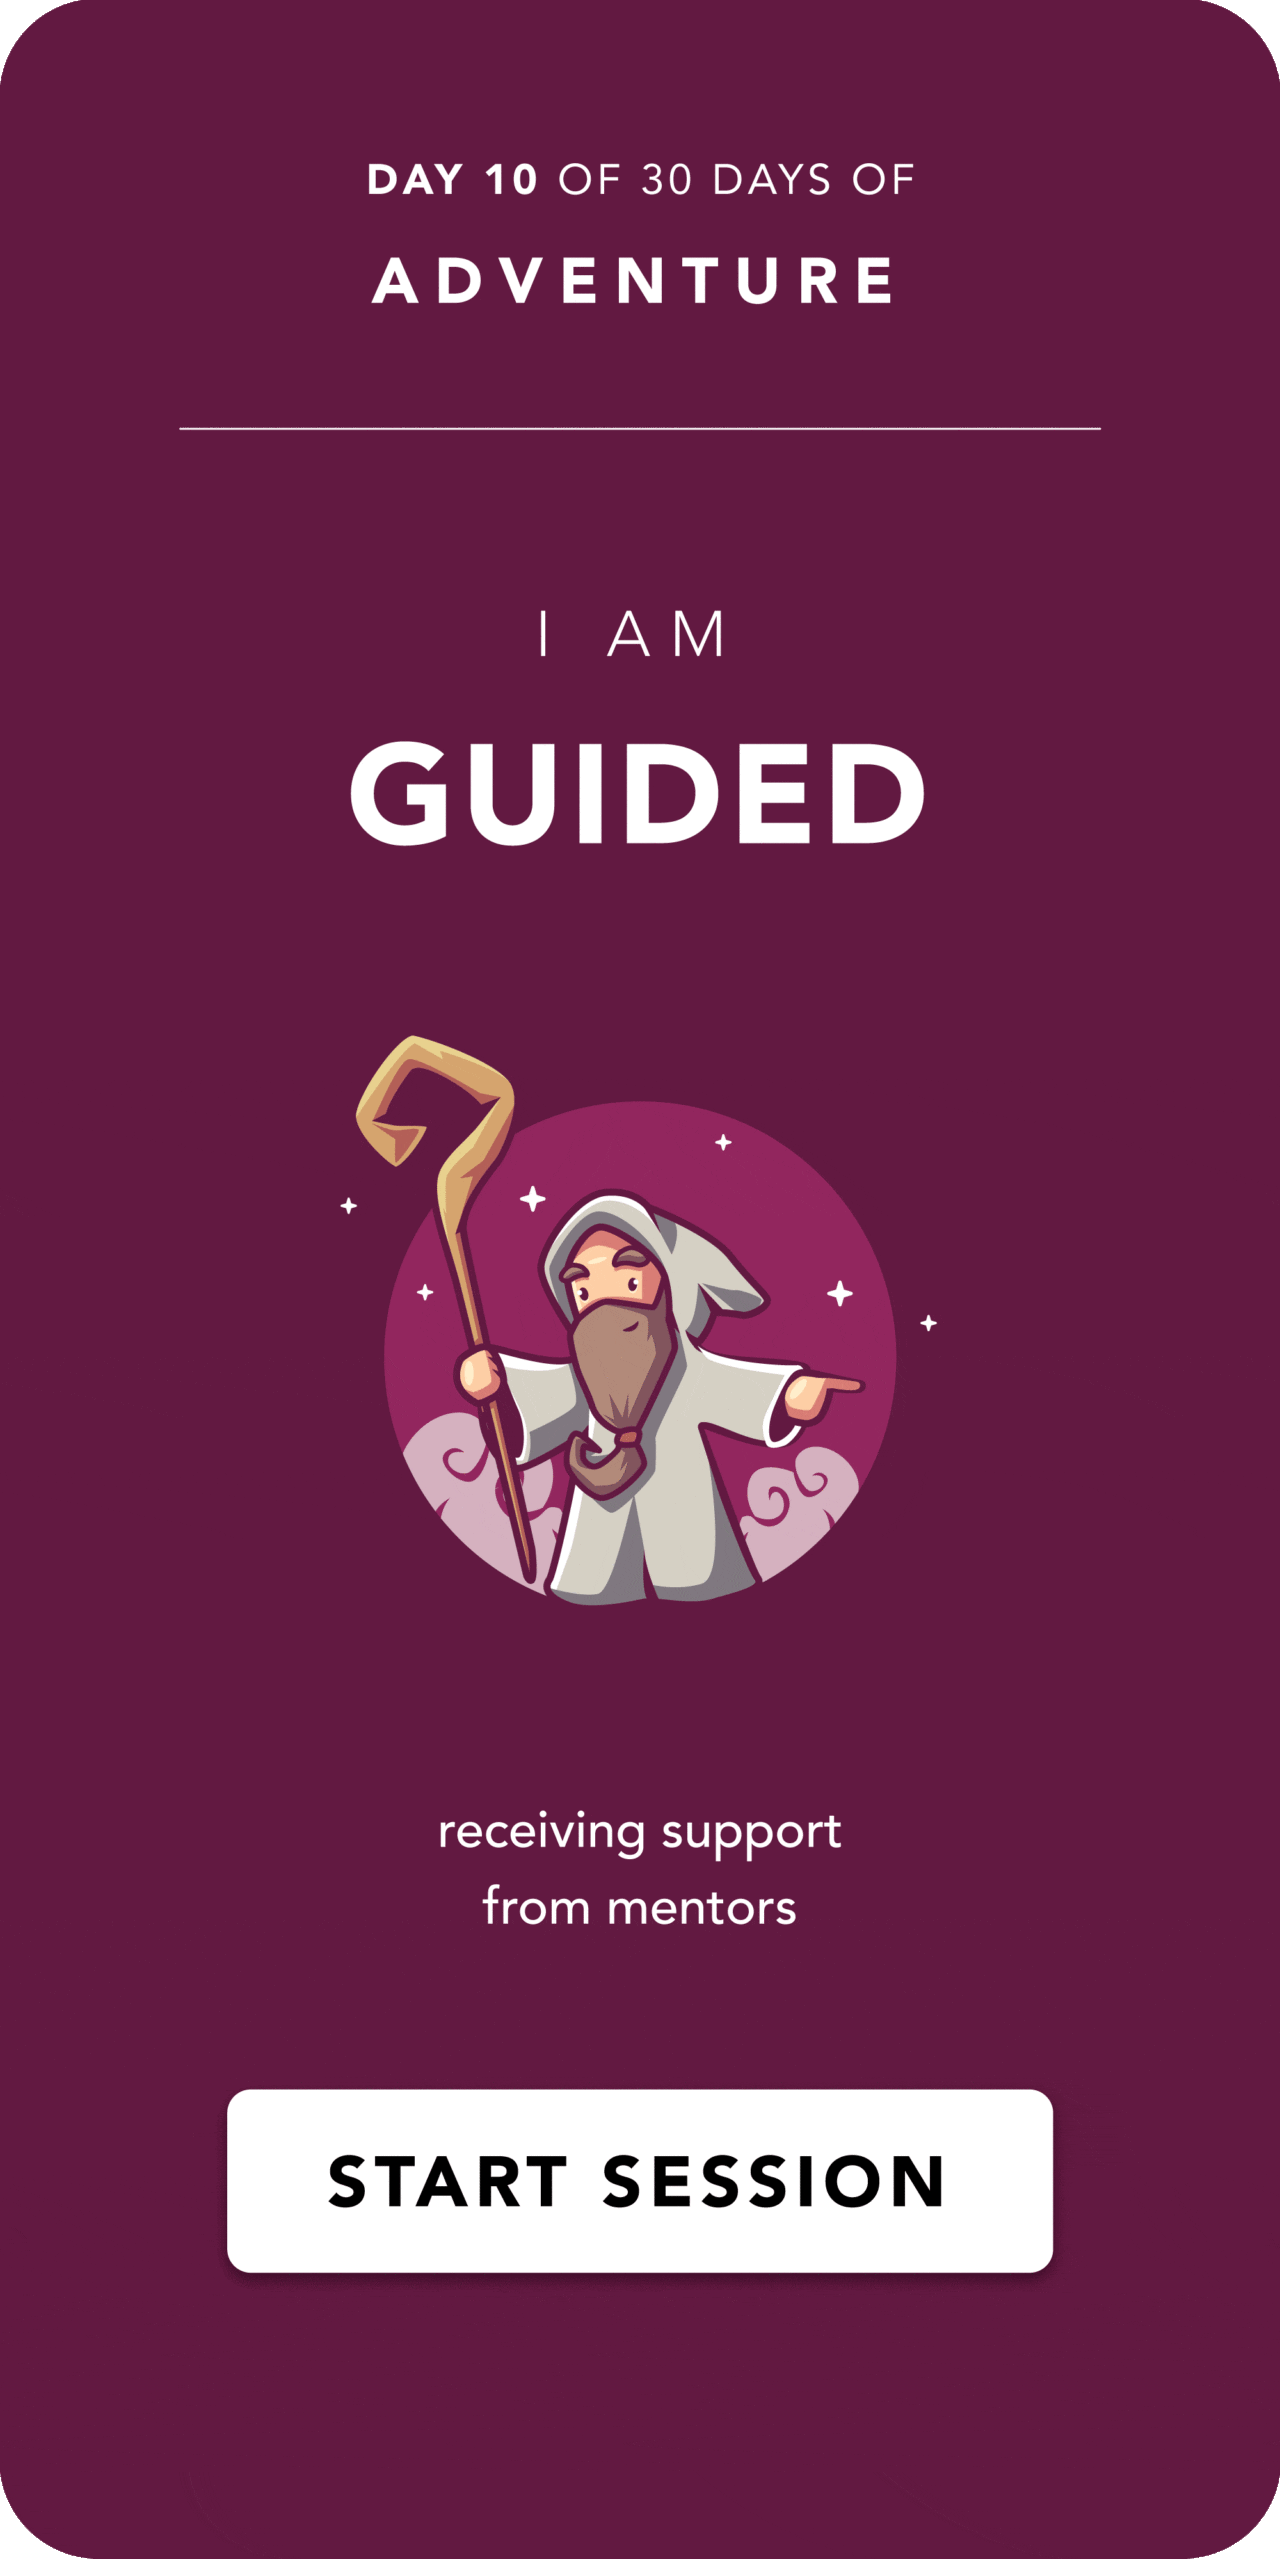 I AM GUIDED